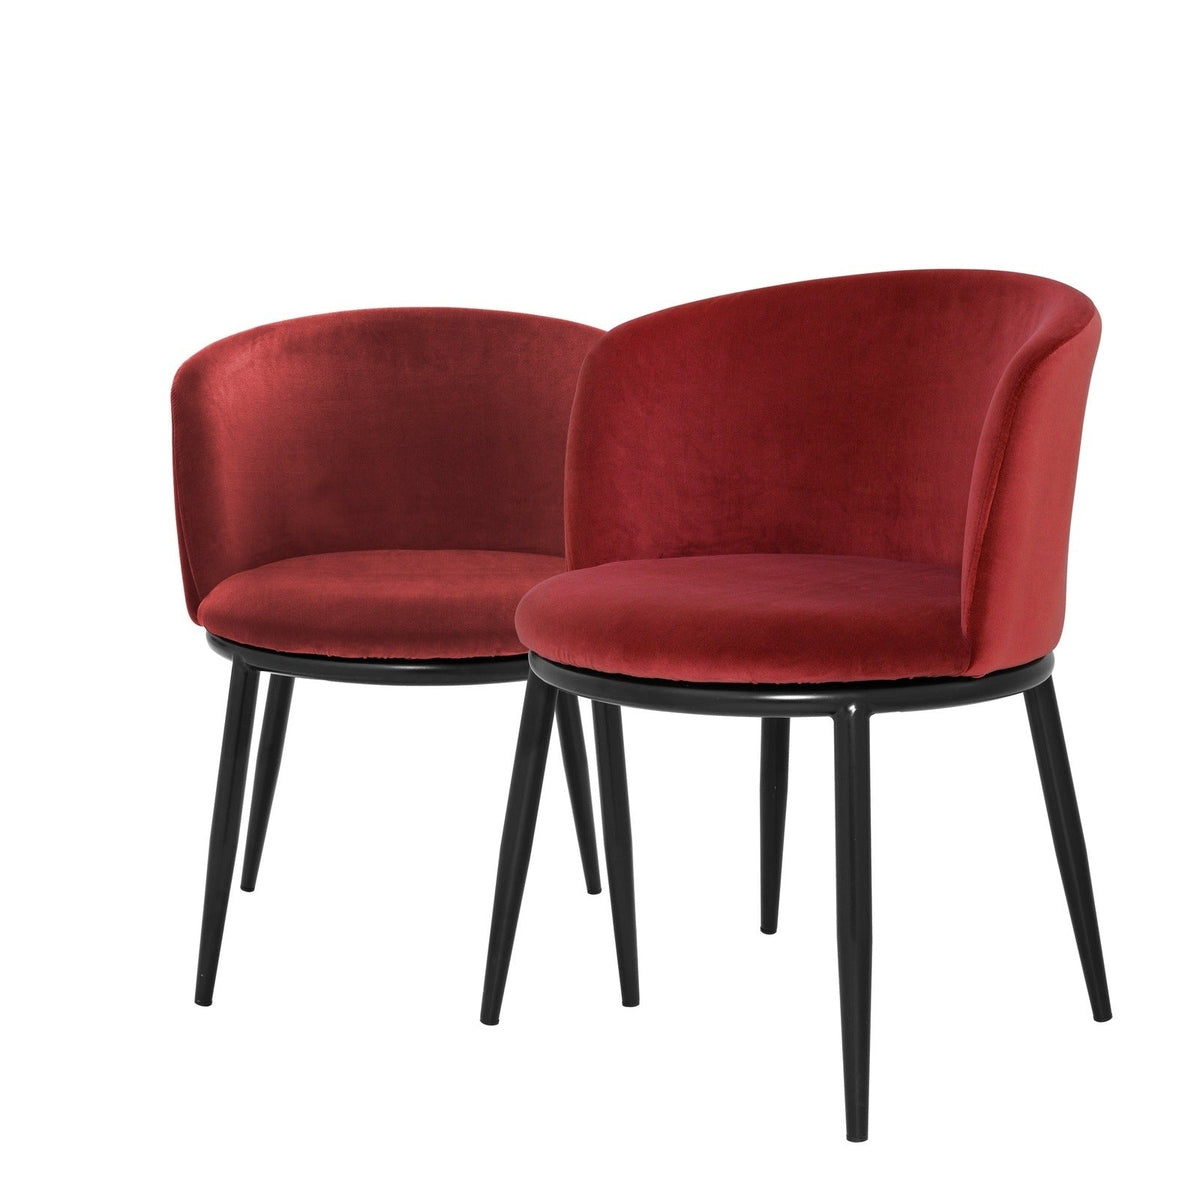 Eichholtz Set Of 2 Filmore Dining Chairs Cameron Red Wine